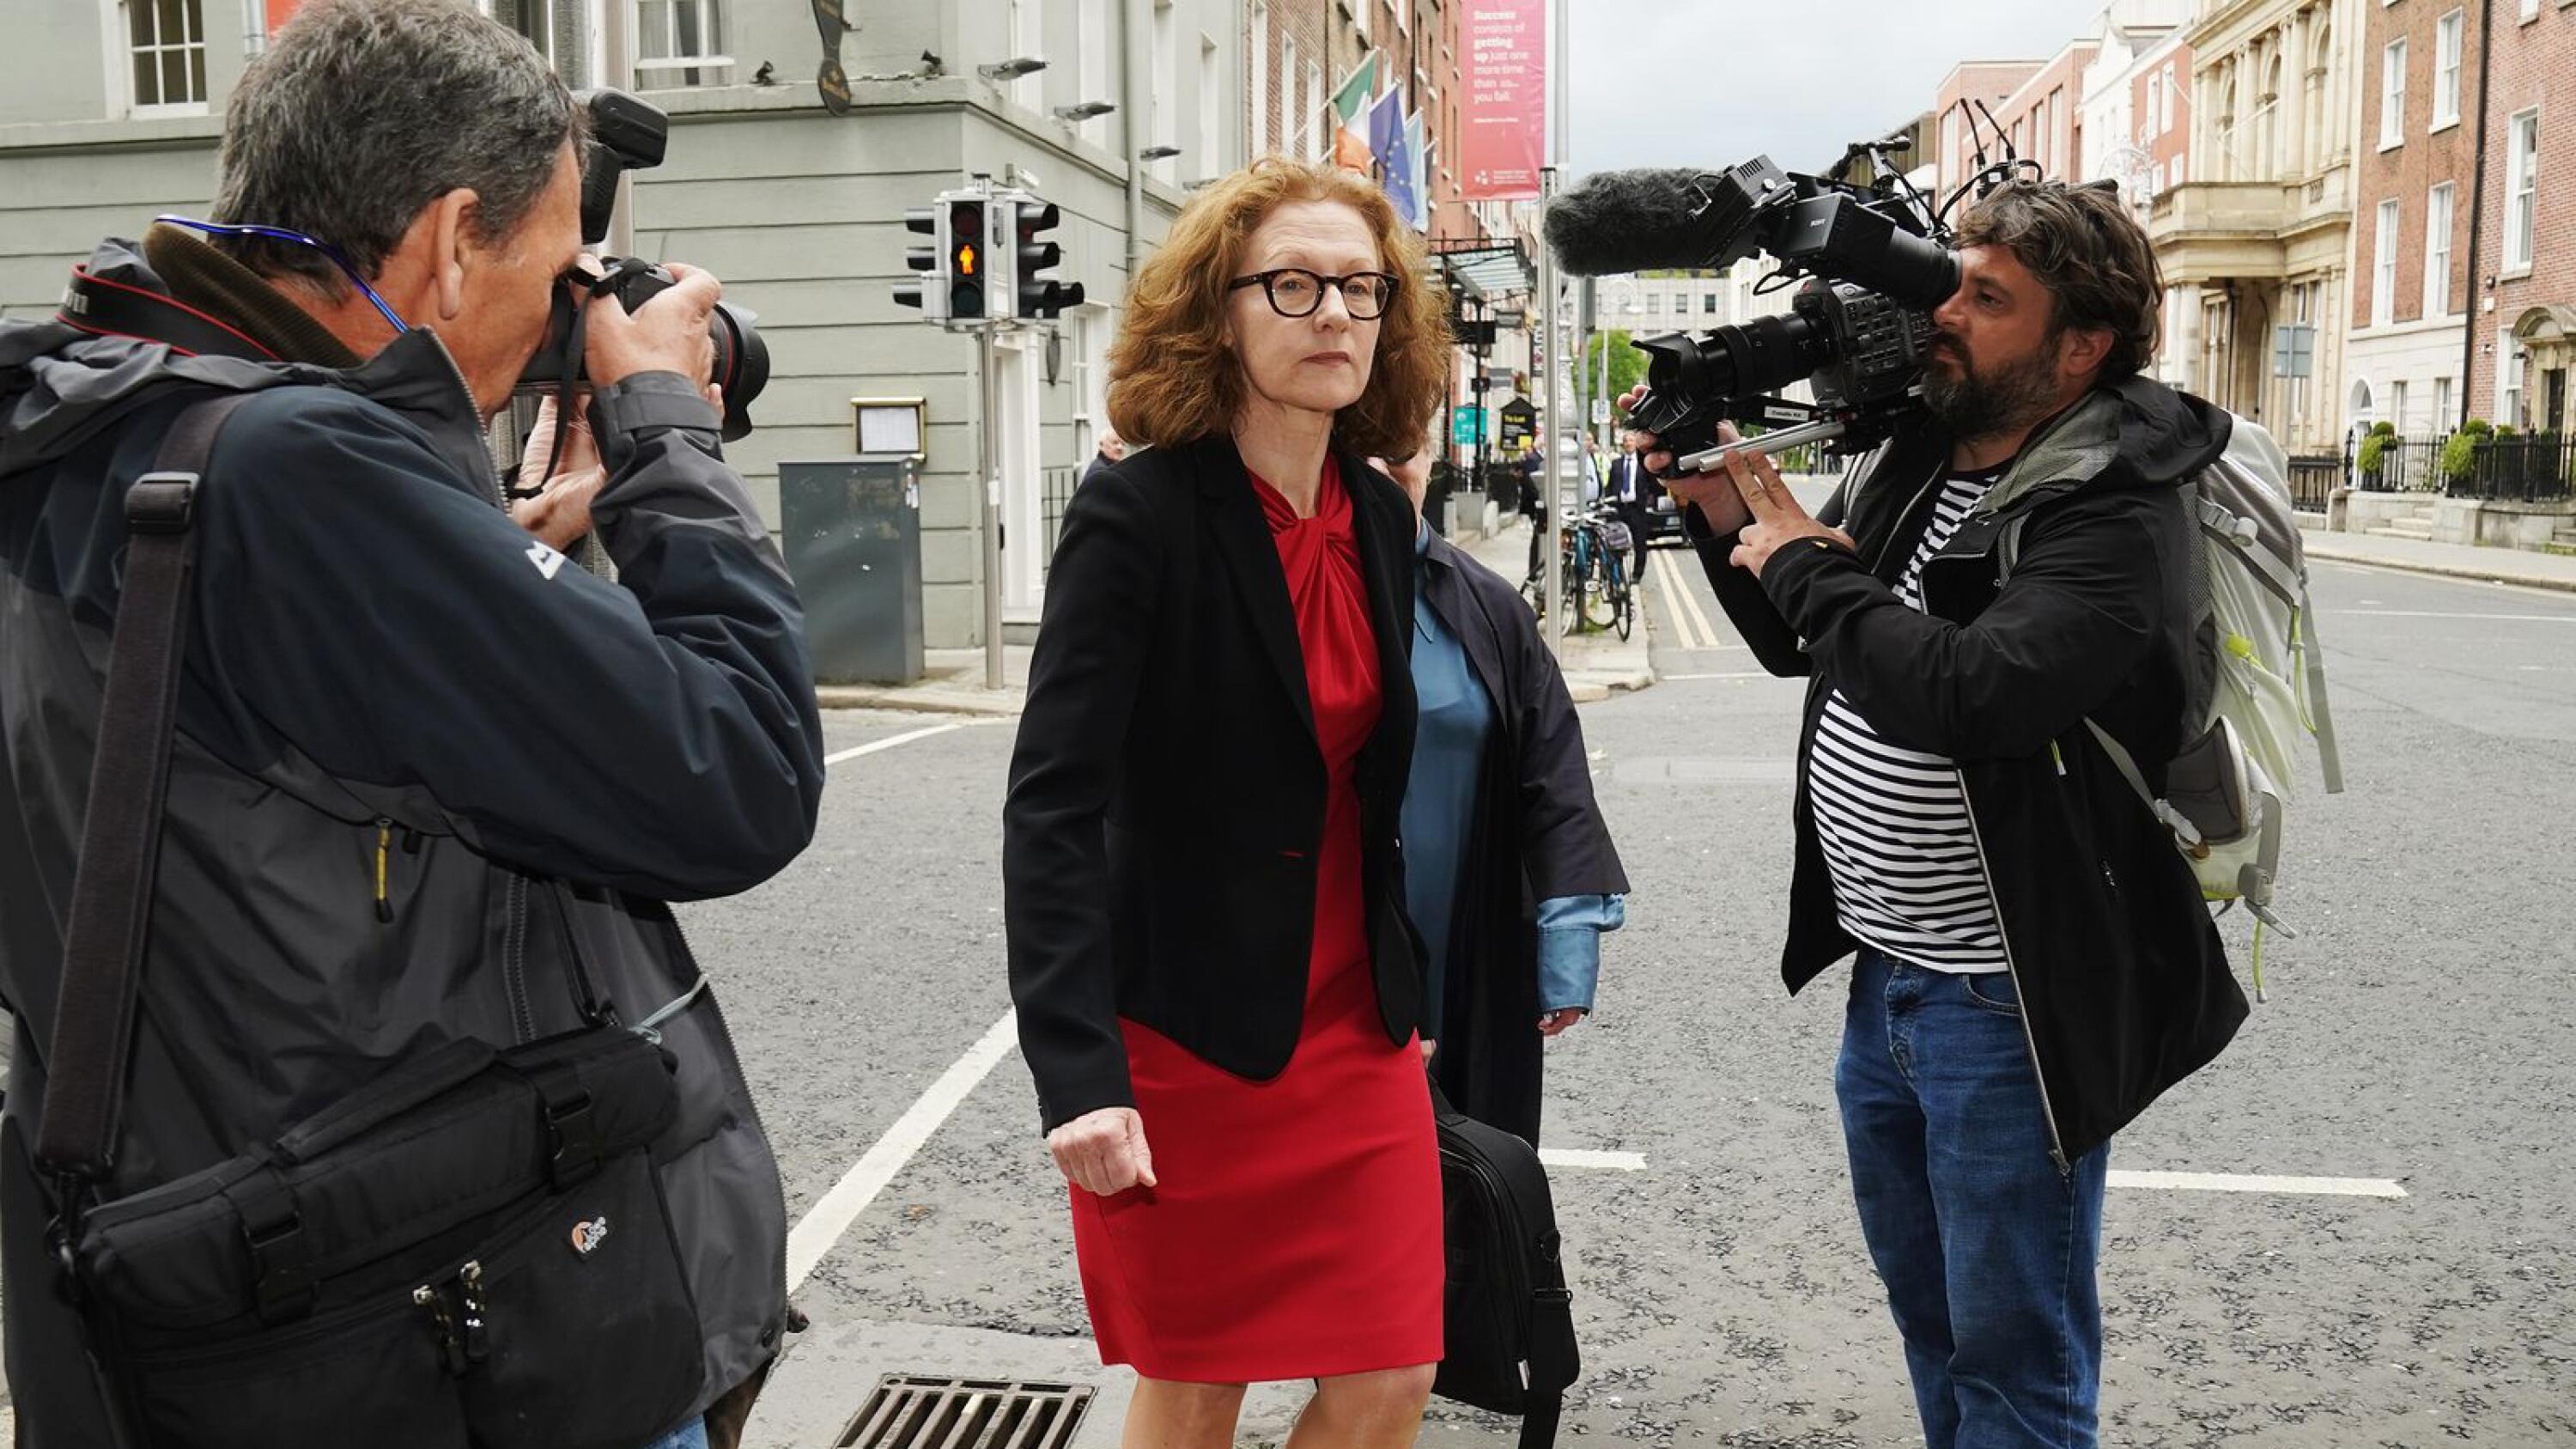 Analysis: Fractures emerge between RTÉ's top brass as TDs watch another  flip flop performance